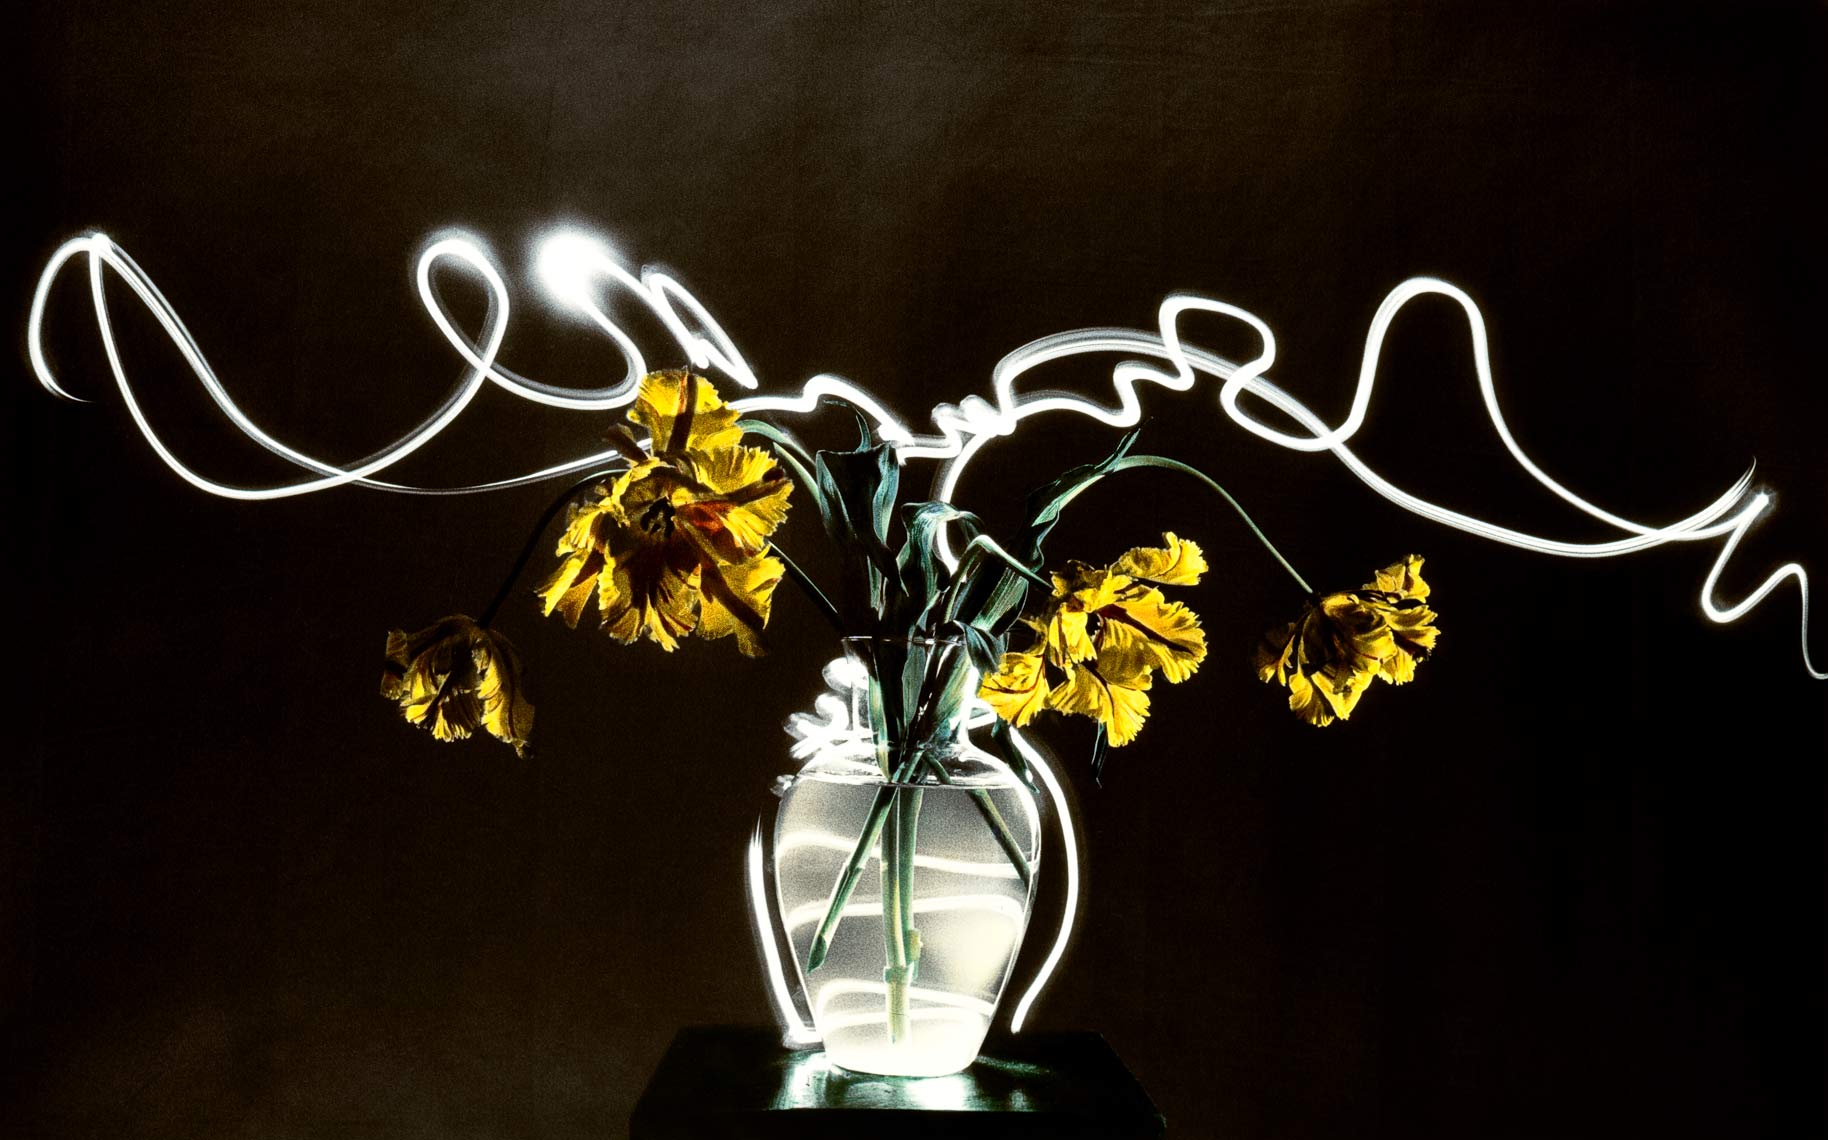 David Lebe; Parrot Tulips 2, 1987, still life, light drawing, hand colored photograph